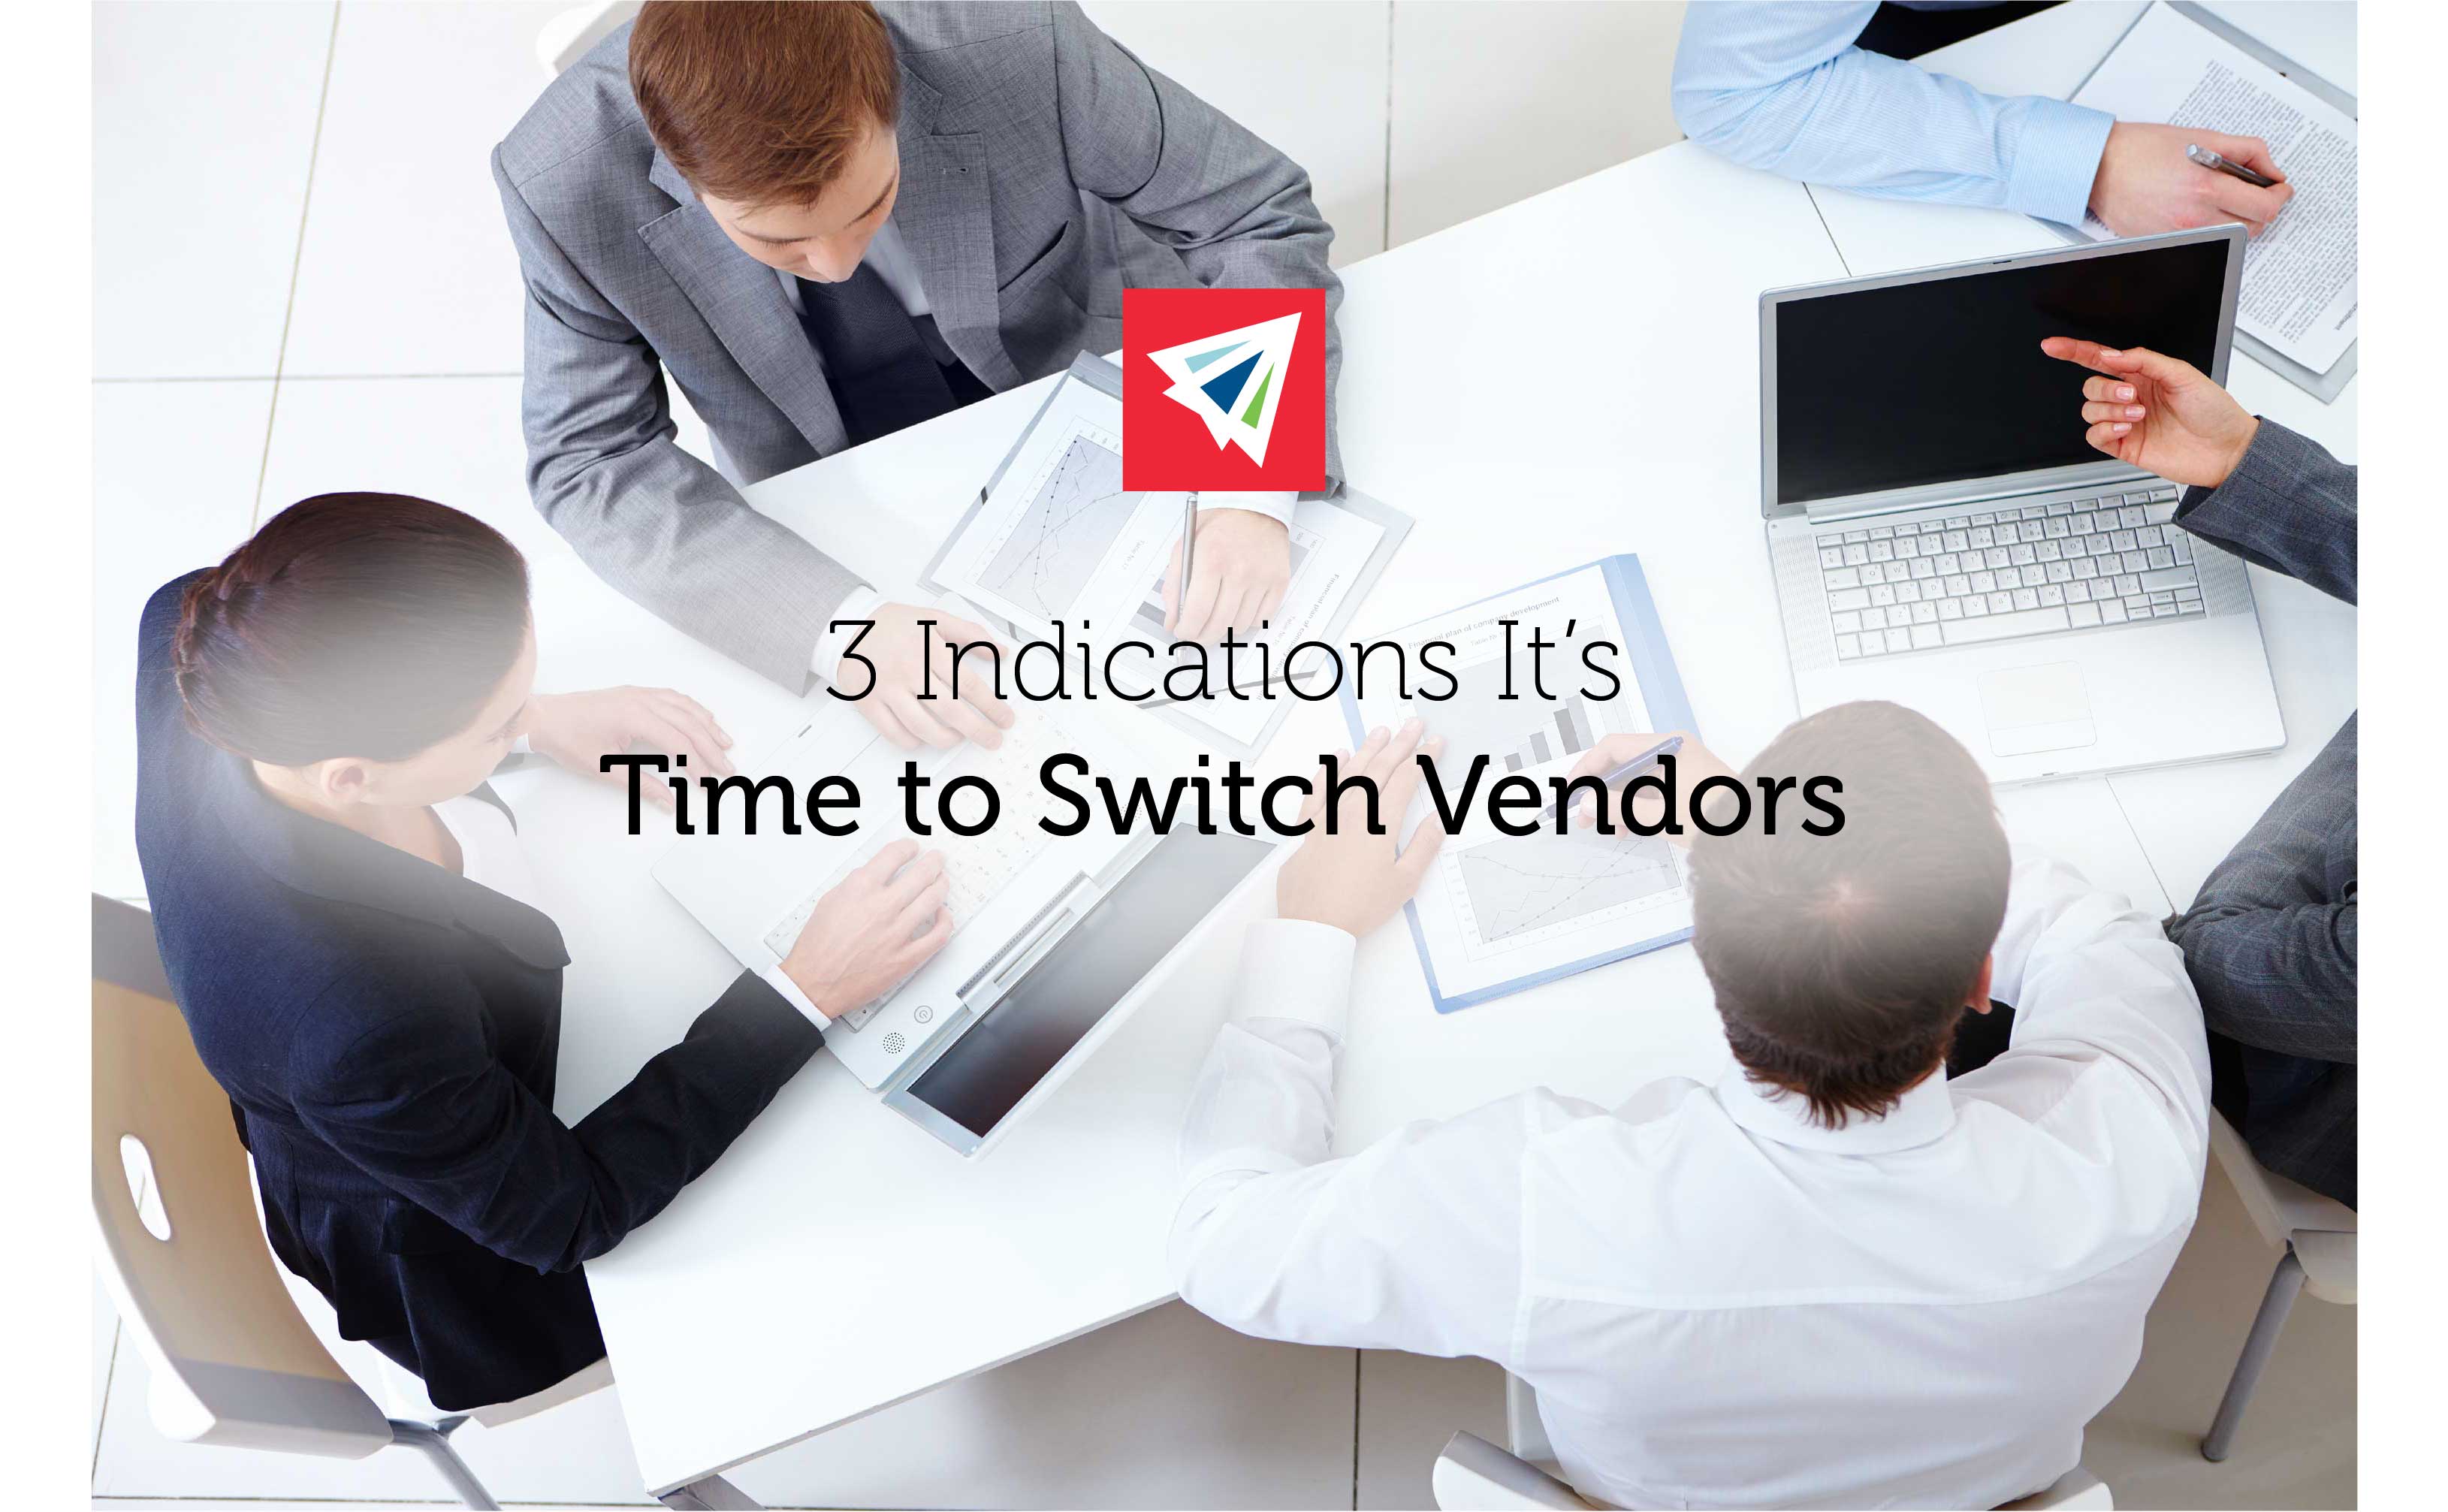 3 Indications It’s Time to Switch Vendors